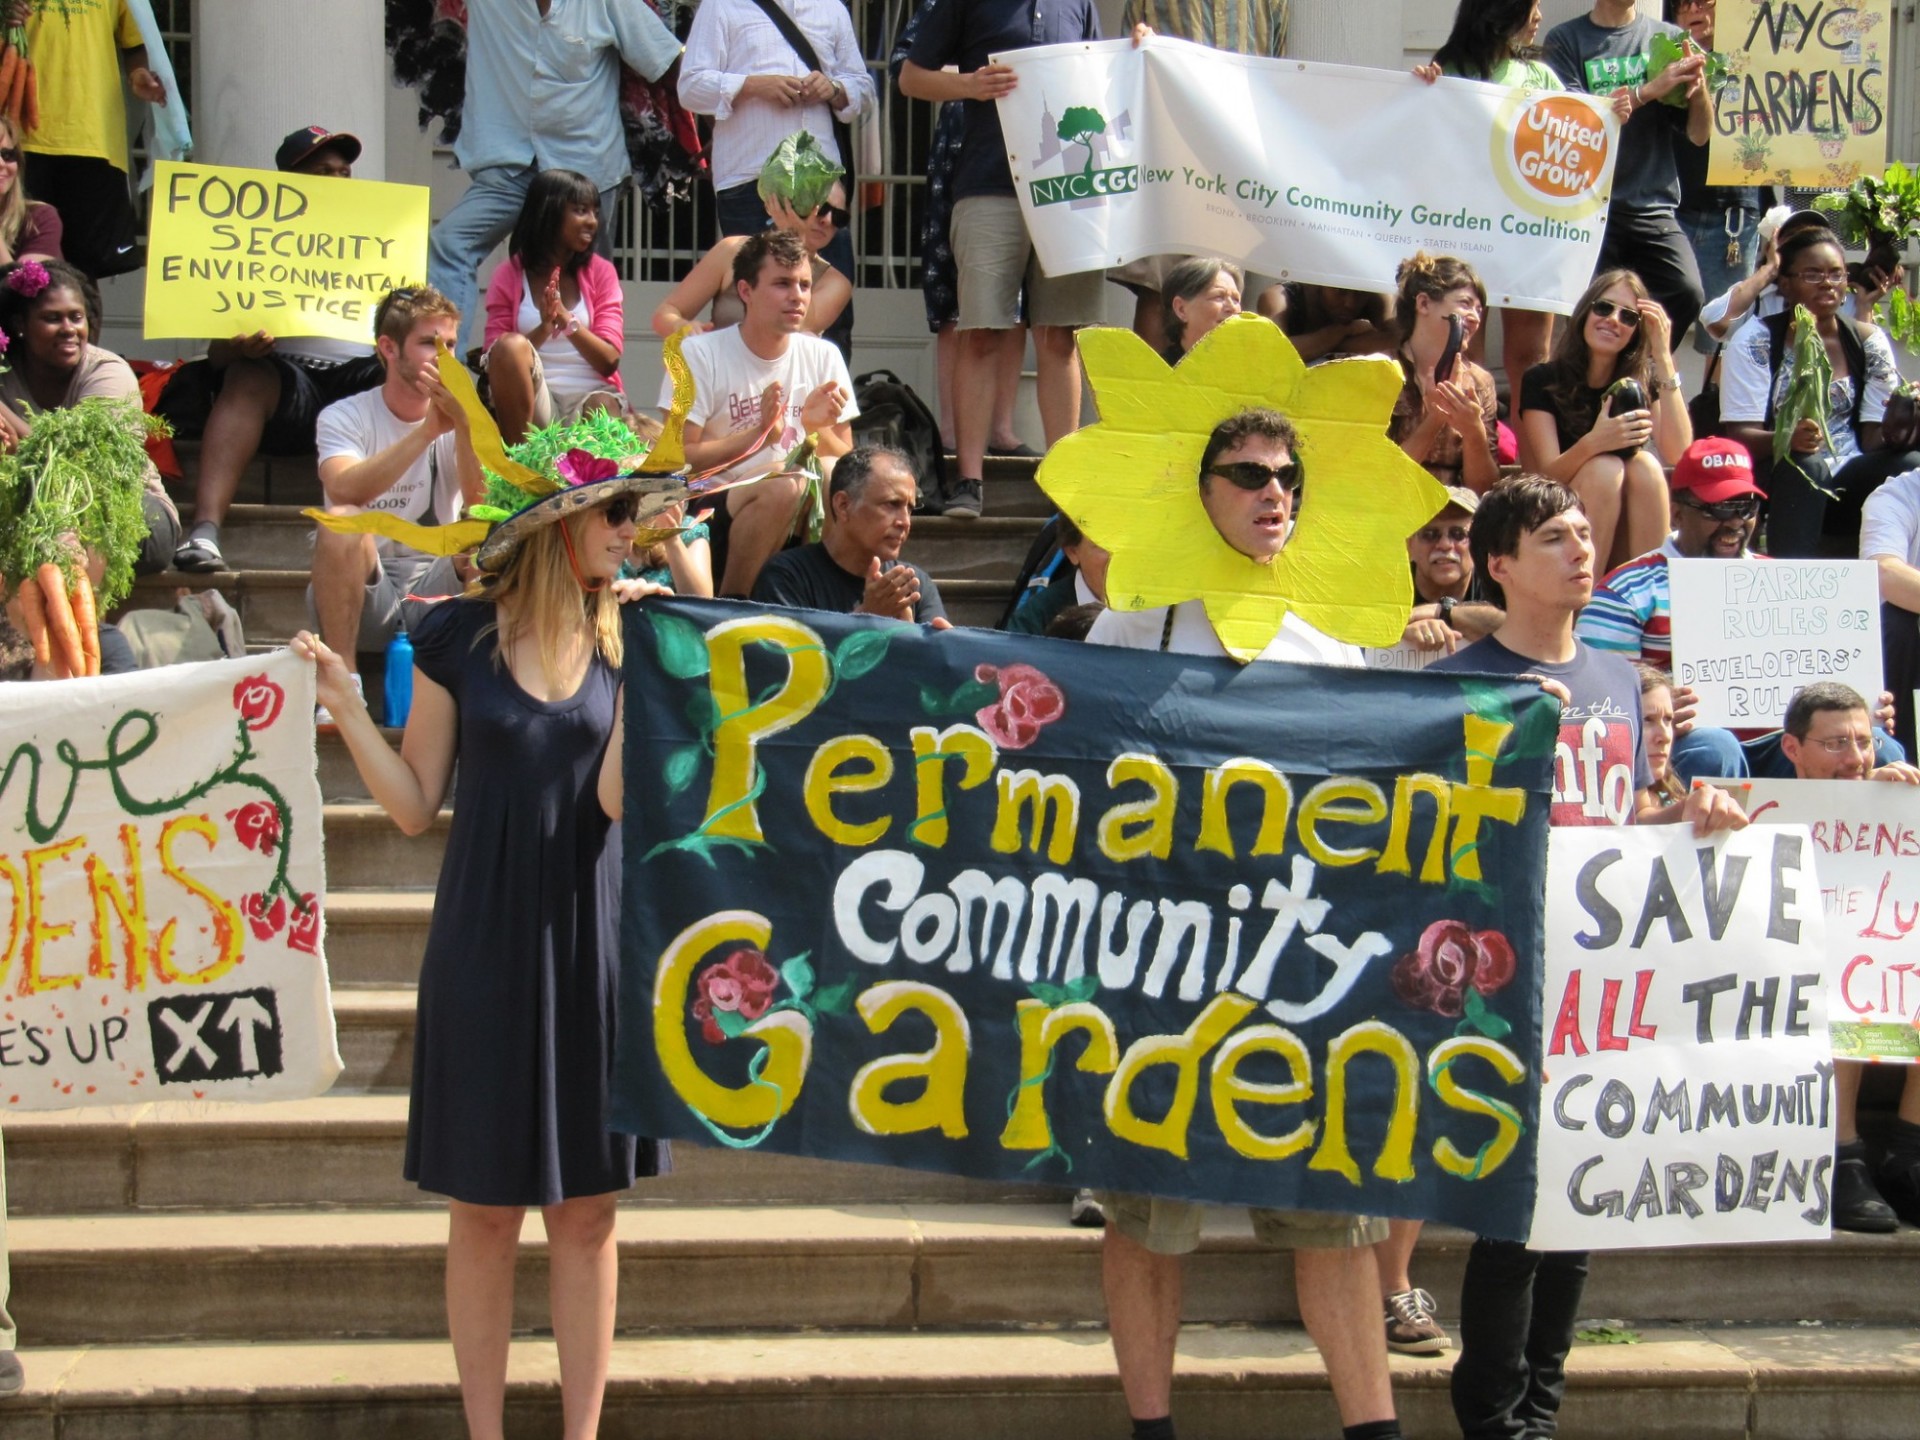 Community gardeners on the steps of a building holding signs in support of community gardening